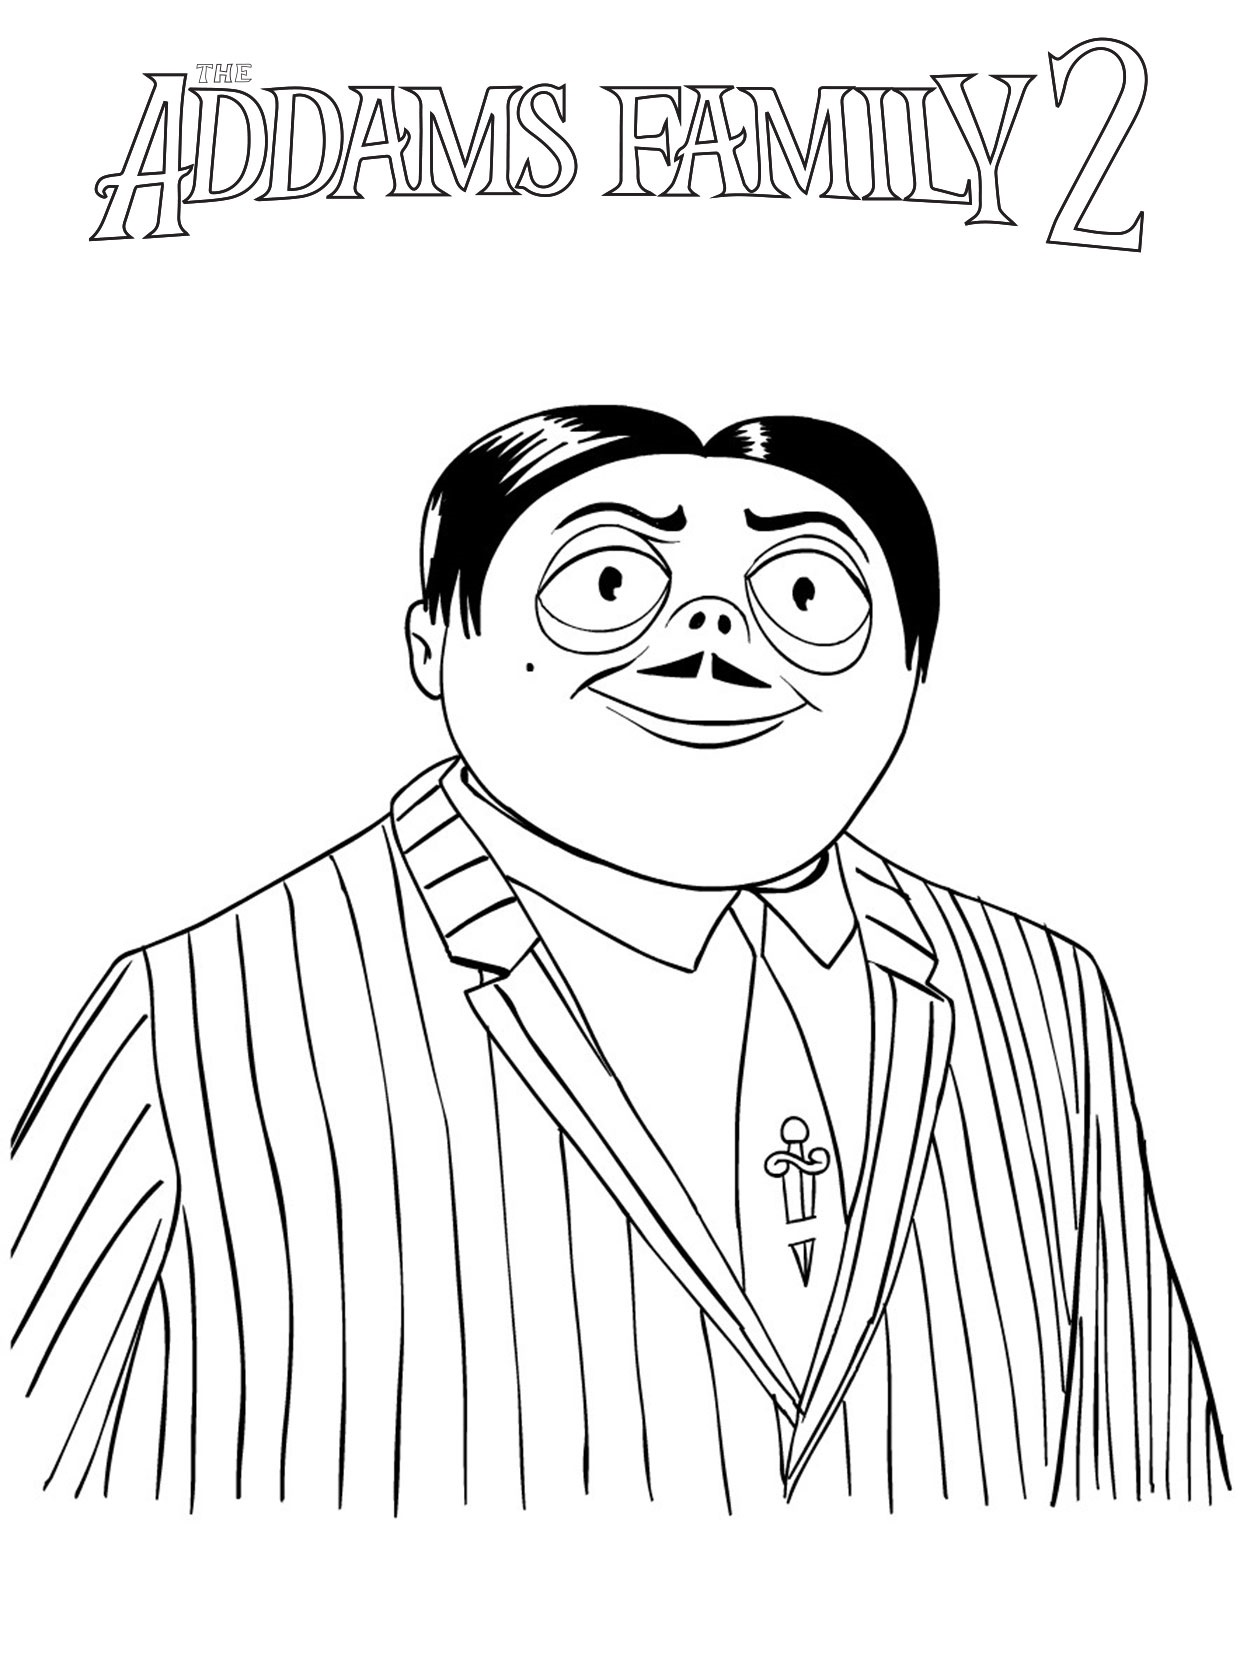 The Addams Family Coloring Pages: A Timeless Icon of Gothic Culture - Gomez Addams Family 2 Coloring Page